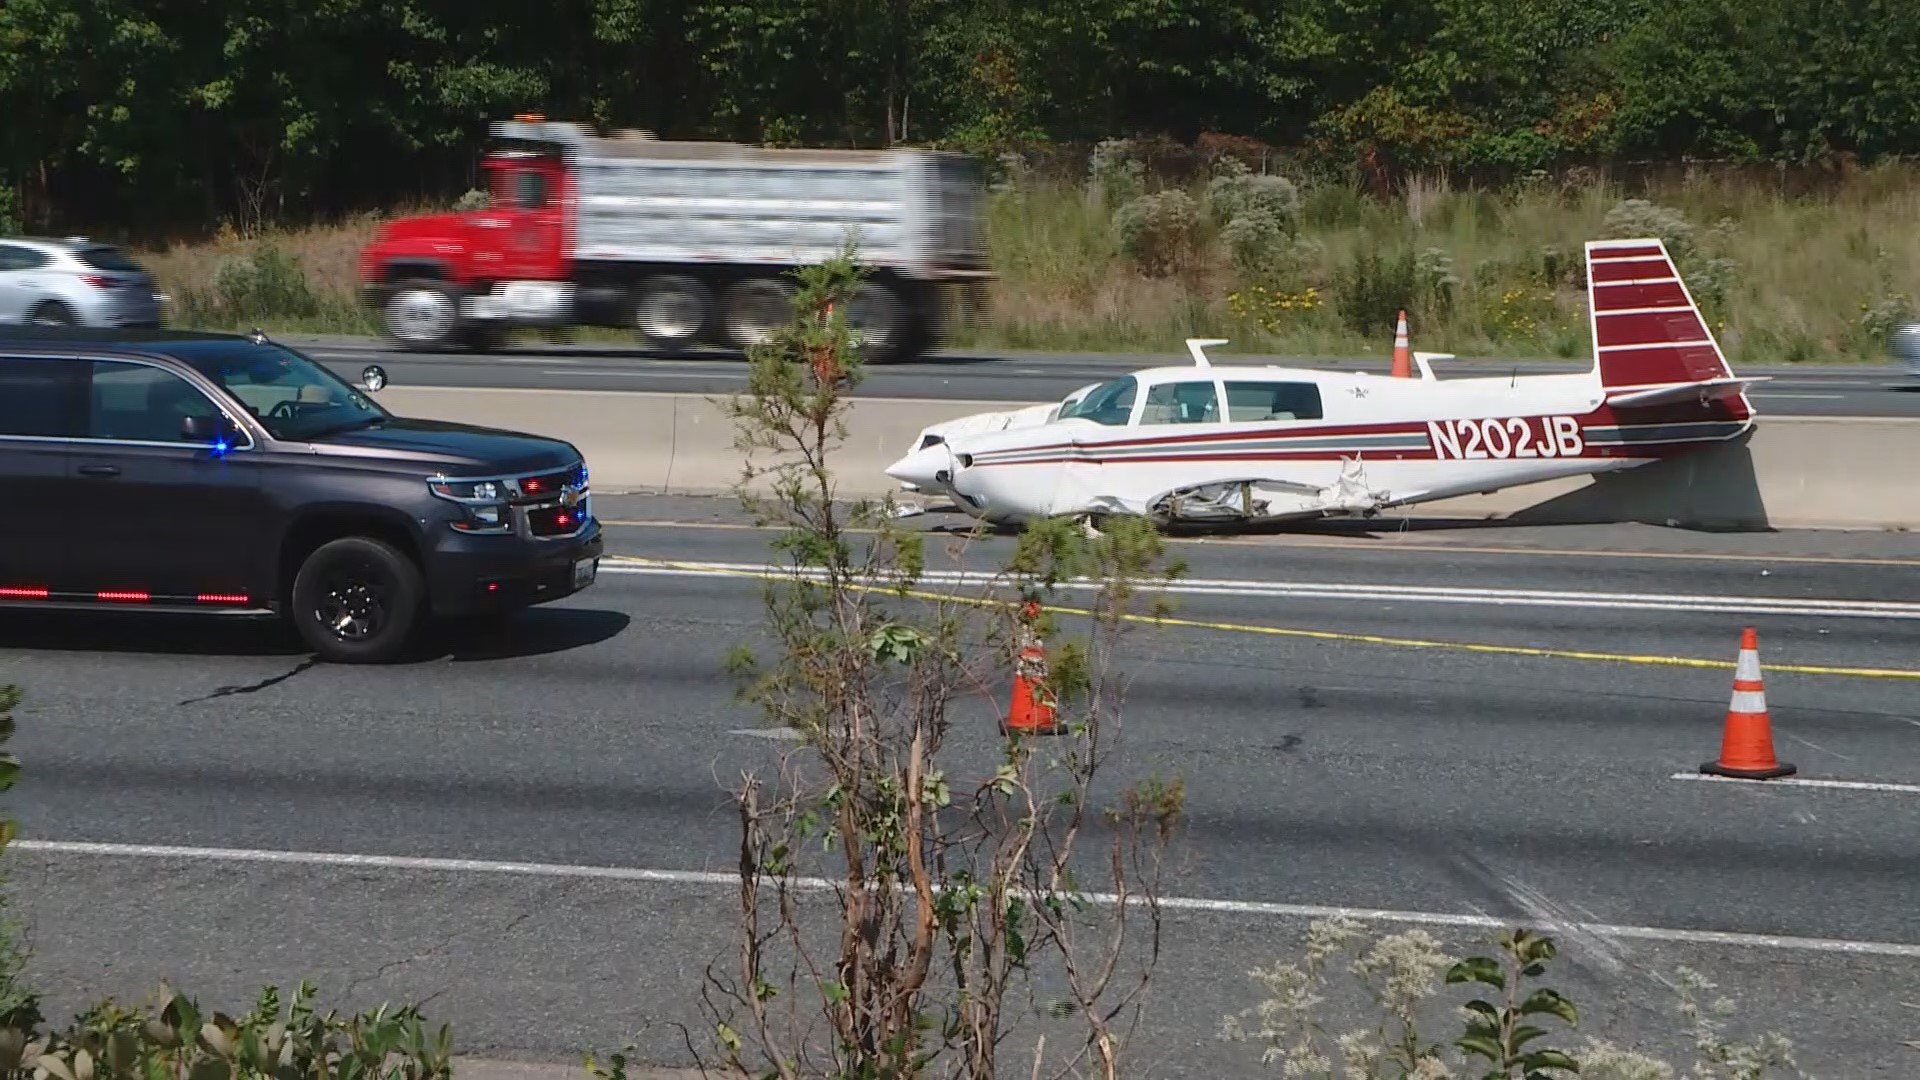 Just two days before that plane crashed into a car on Route 50, the owner of Freeway Airport warned the Prince George's County Council that his airfield  should be closed for safety reasons.